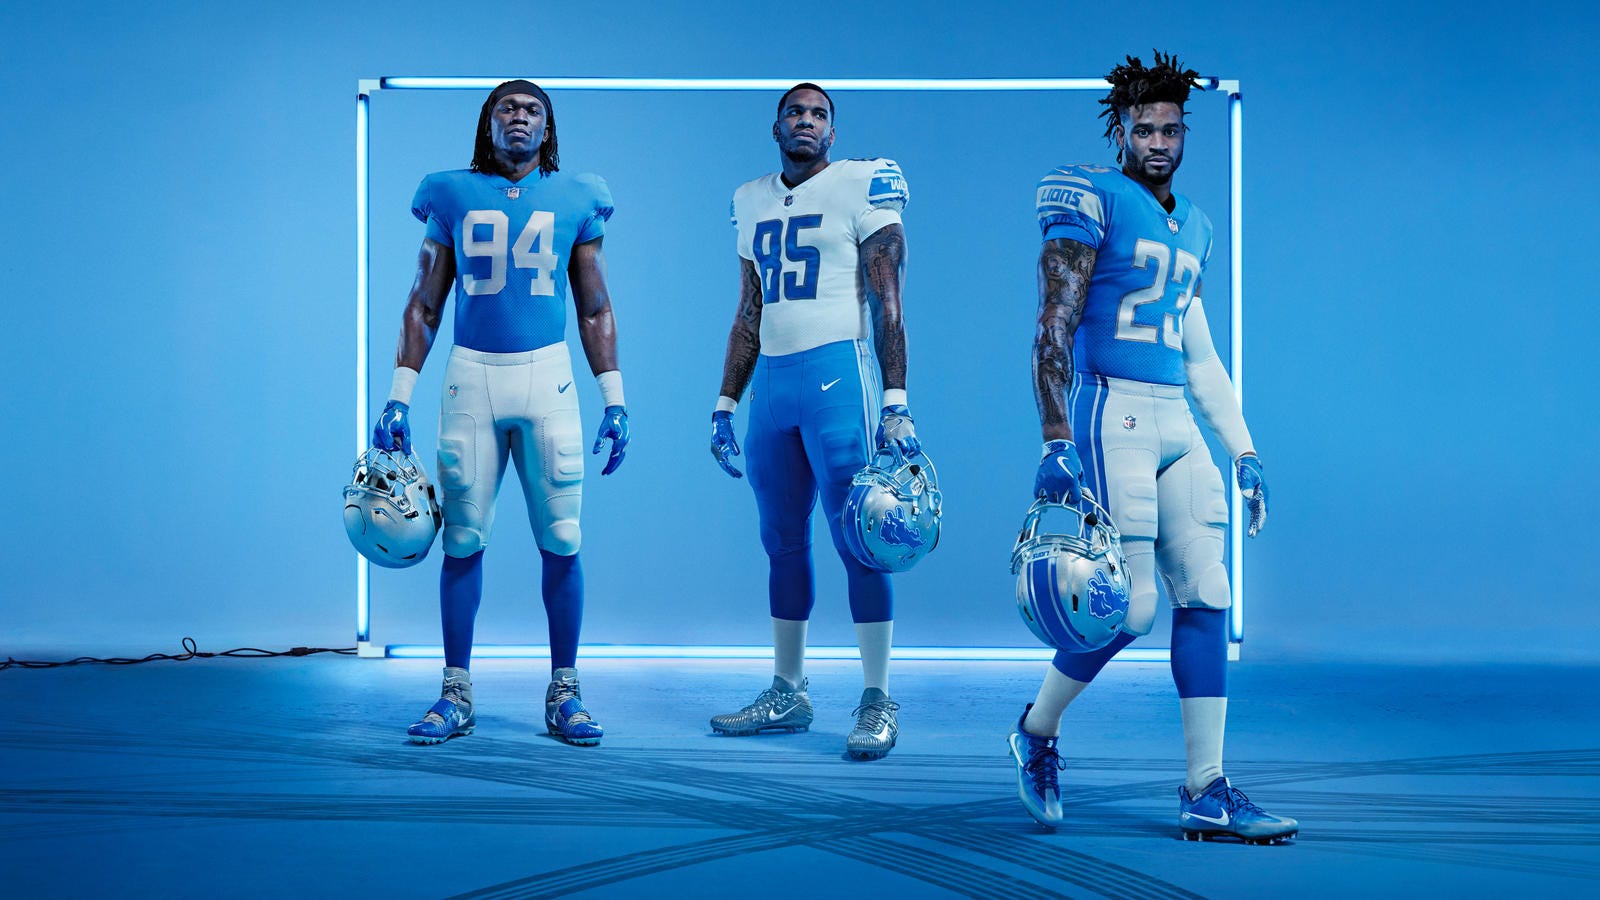 new lions jersey